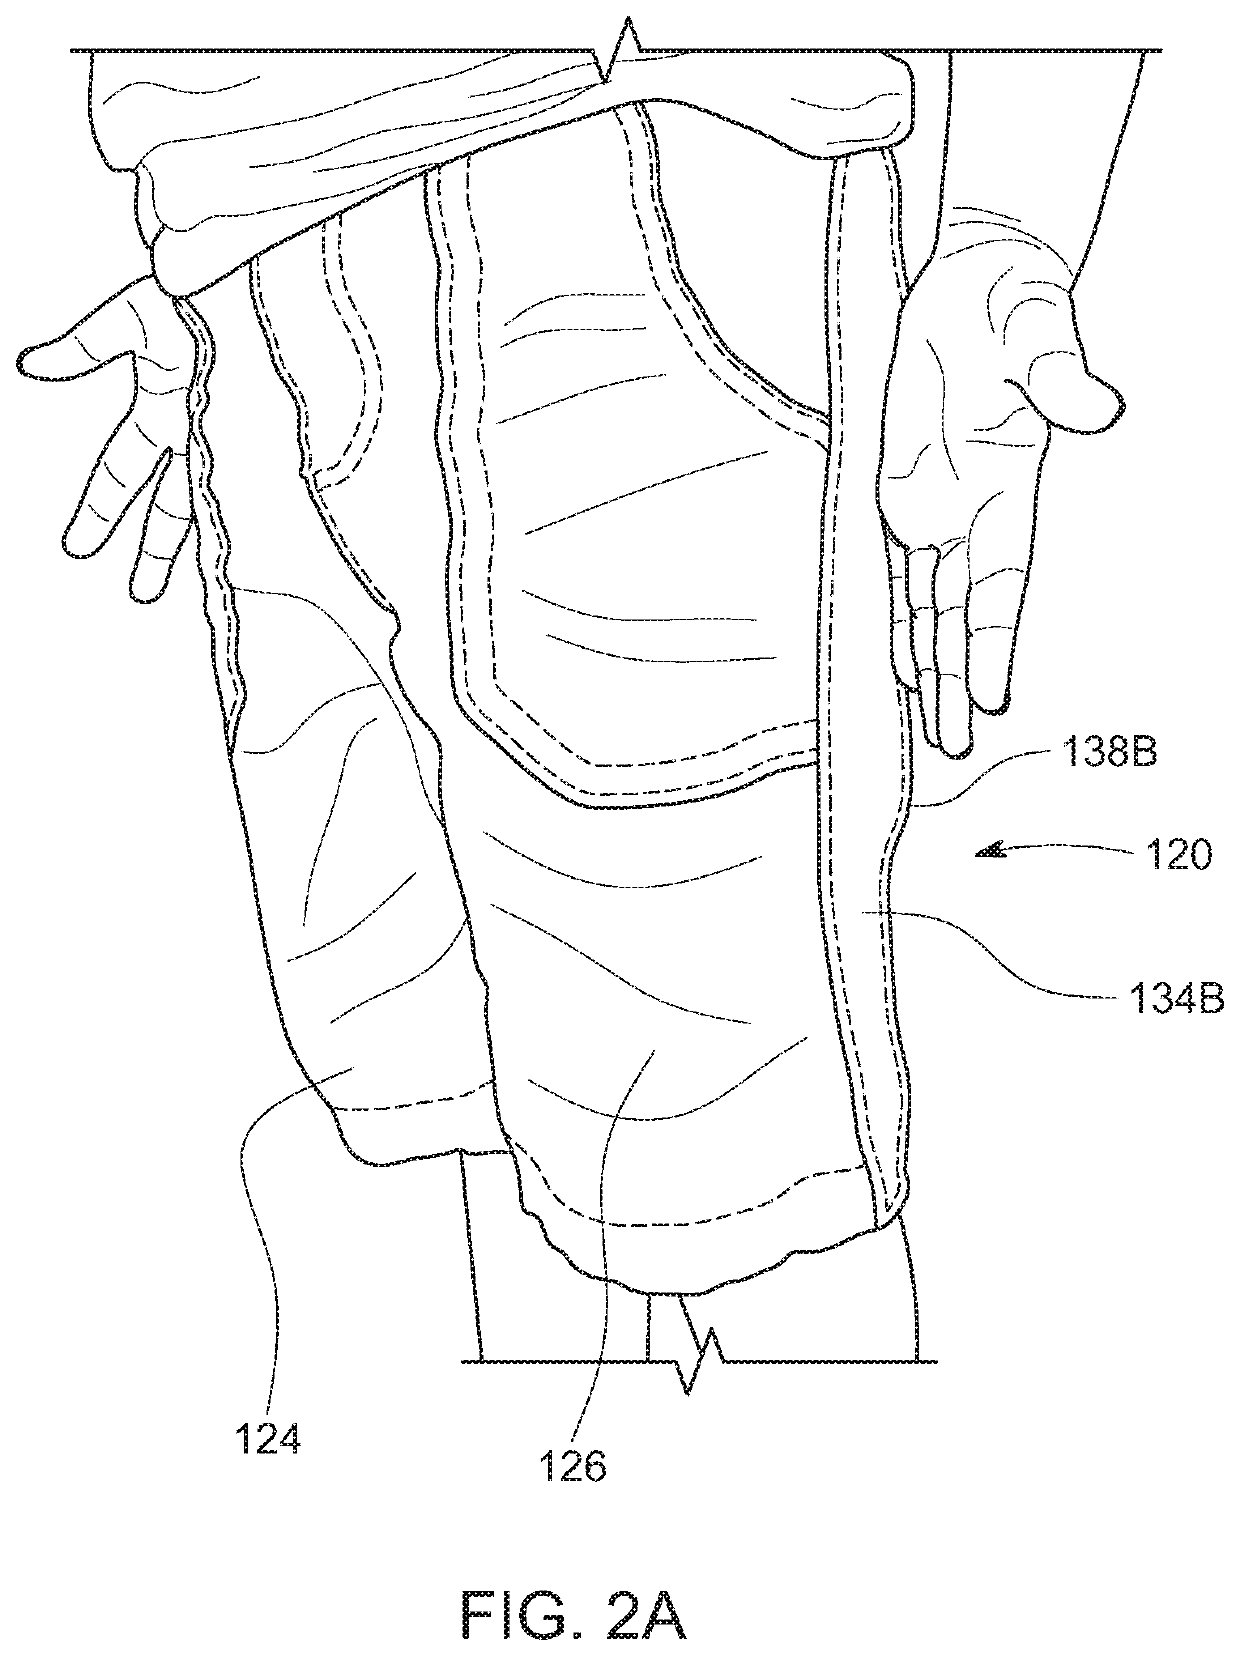 Therapeutic clothing having sensory strips and stress relieving components incorporated therein